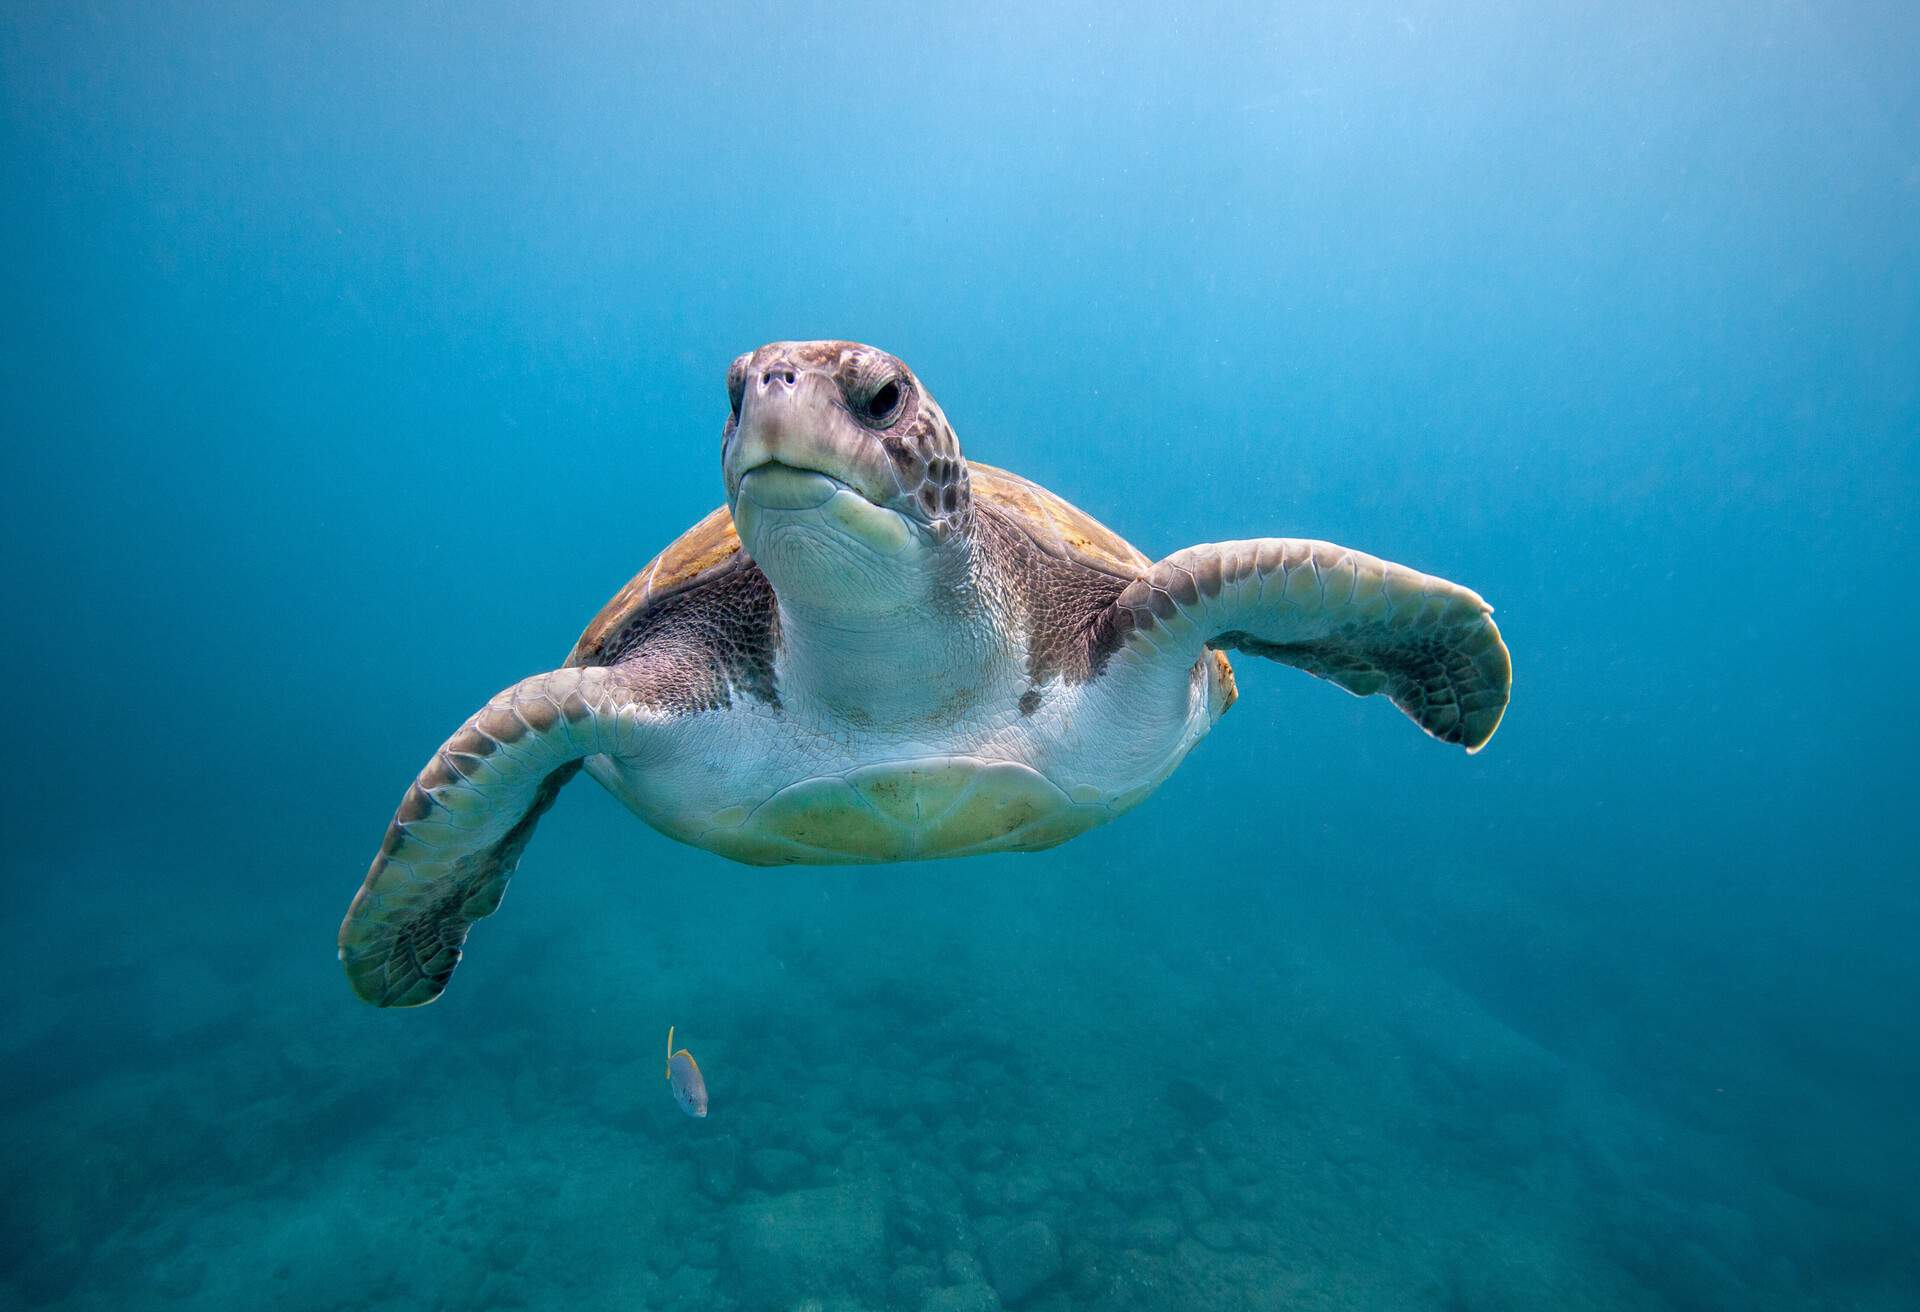 Green sea turtle swimming near El Puertito beach on the island of Tenerife in the Canary Islands.